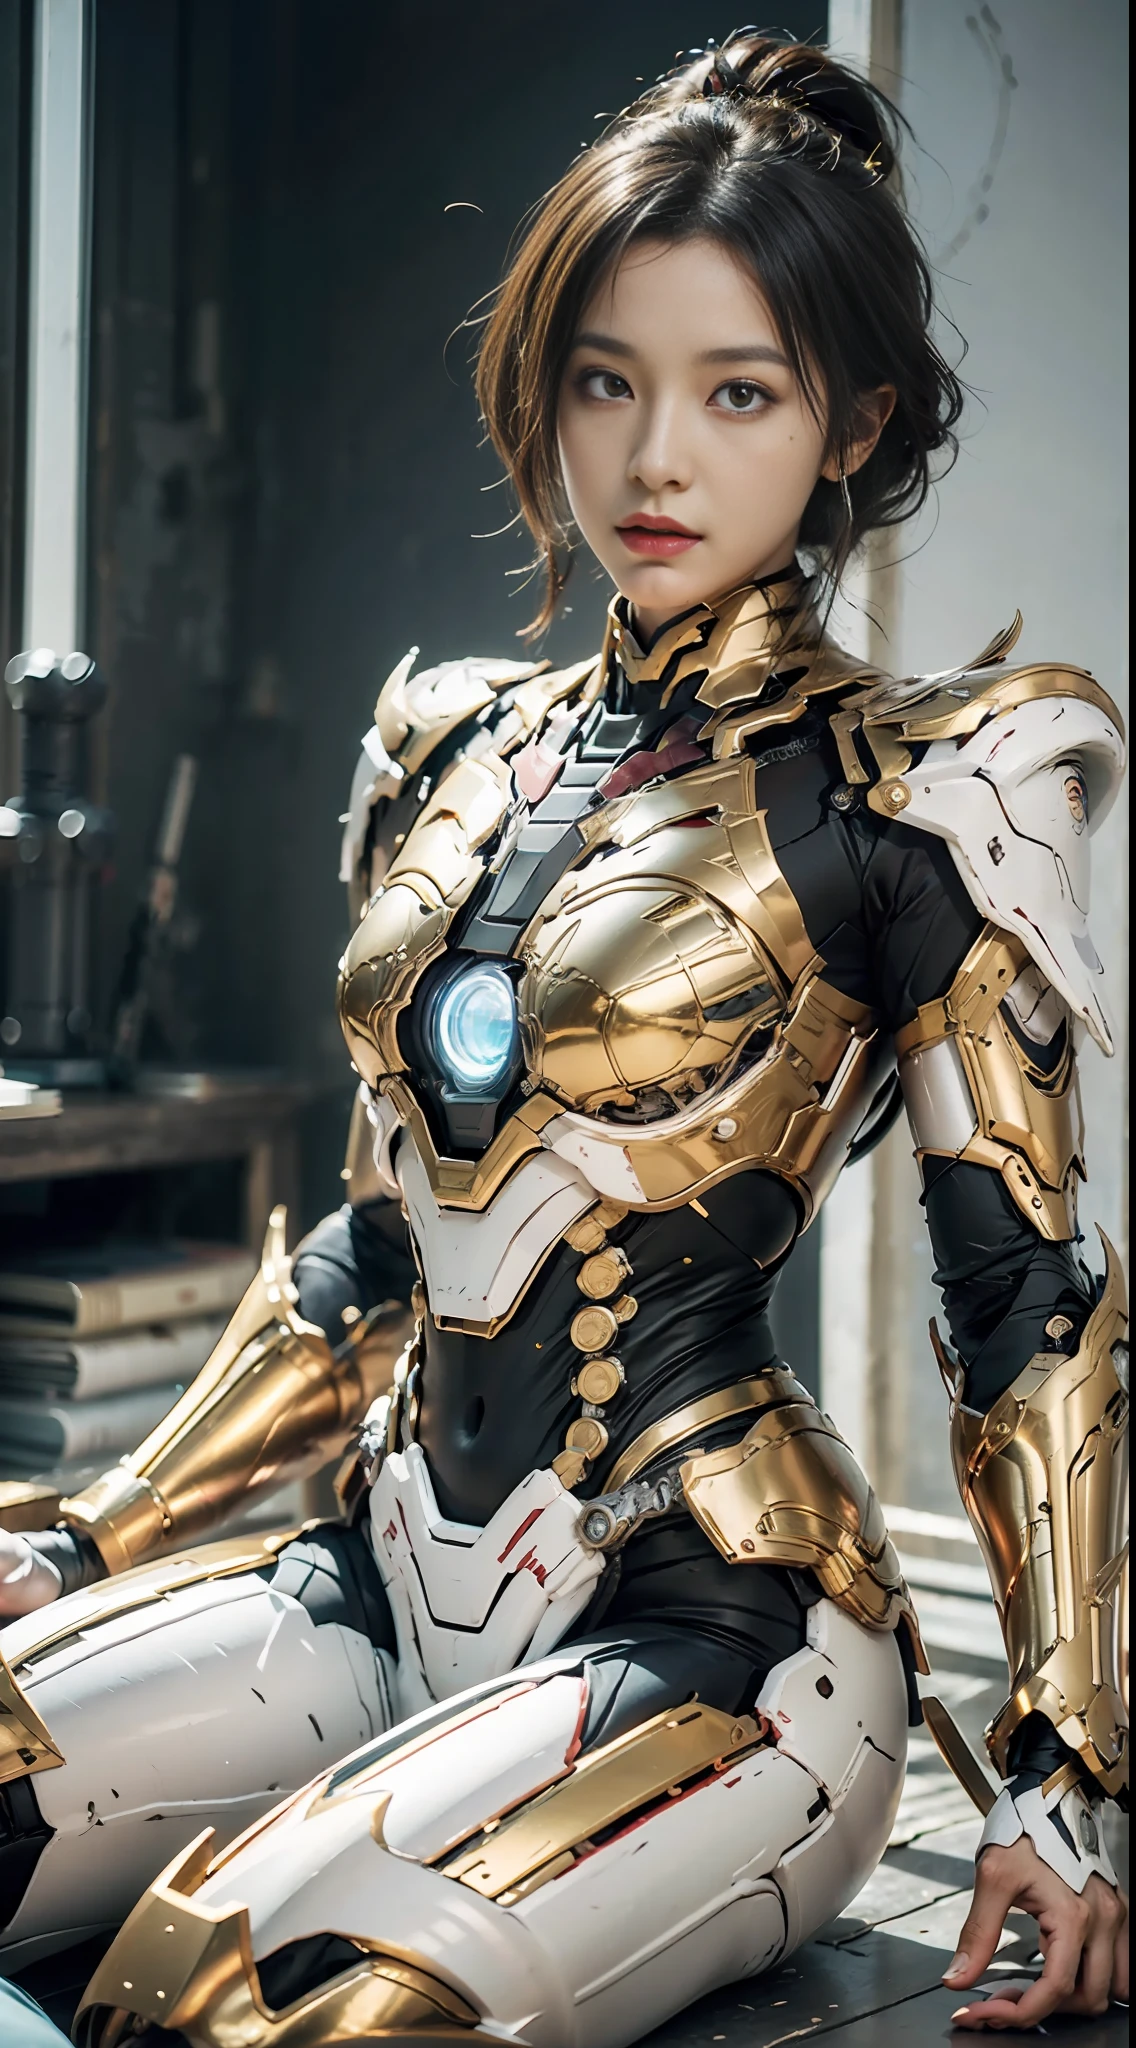 Dragon Princess, Golden Saint Seiya Limb Armor, Marvel Movie Iron Man Cuirass, (Gundam 00 Gundam Exia: 1.5), (Mecha) (Mechanical) (Armor), (Open leg: 1.3), Perfect, (Wide Angle), (Black Background: 1.6), Best Quality, Masterpiece, Super Resolution, (Reality: 1.4), 1 Girl, Bare Shoulders, Crazy Details, (Hip Folds: 1.2), Lower Chest, Side Chest, Unrealistic Engine Style, Boca Effect, David La Chapelle style lens, bioluminescent palette: light blue, light gold, light pink, bright white, wide angle, ultra-fine, cinematic still life, vibrant, Sakimichan style, perfect eyes, highest image quality 8K, inspired by Harry Winston, Canon EOS R 6 shooting masterpiece "Chaos 50,--, under eye mole, ray tracing, surrealism, textured skin --s2